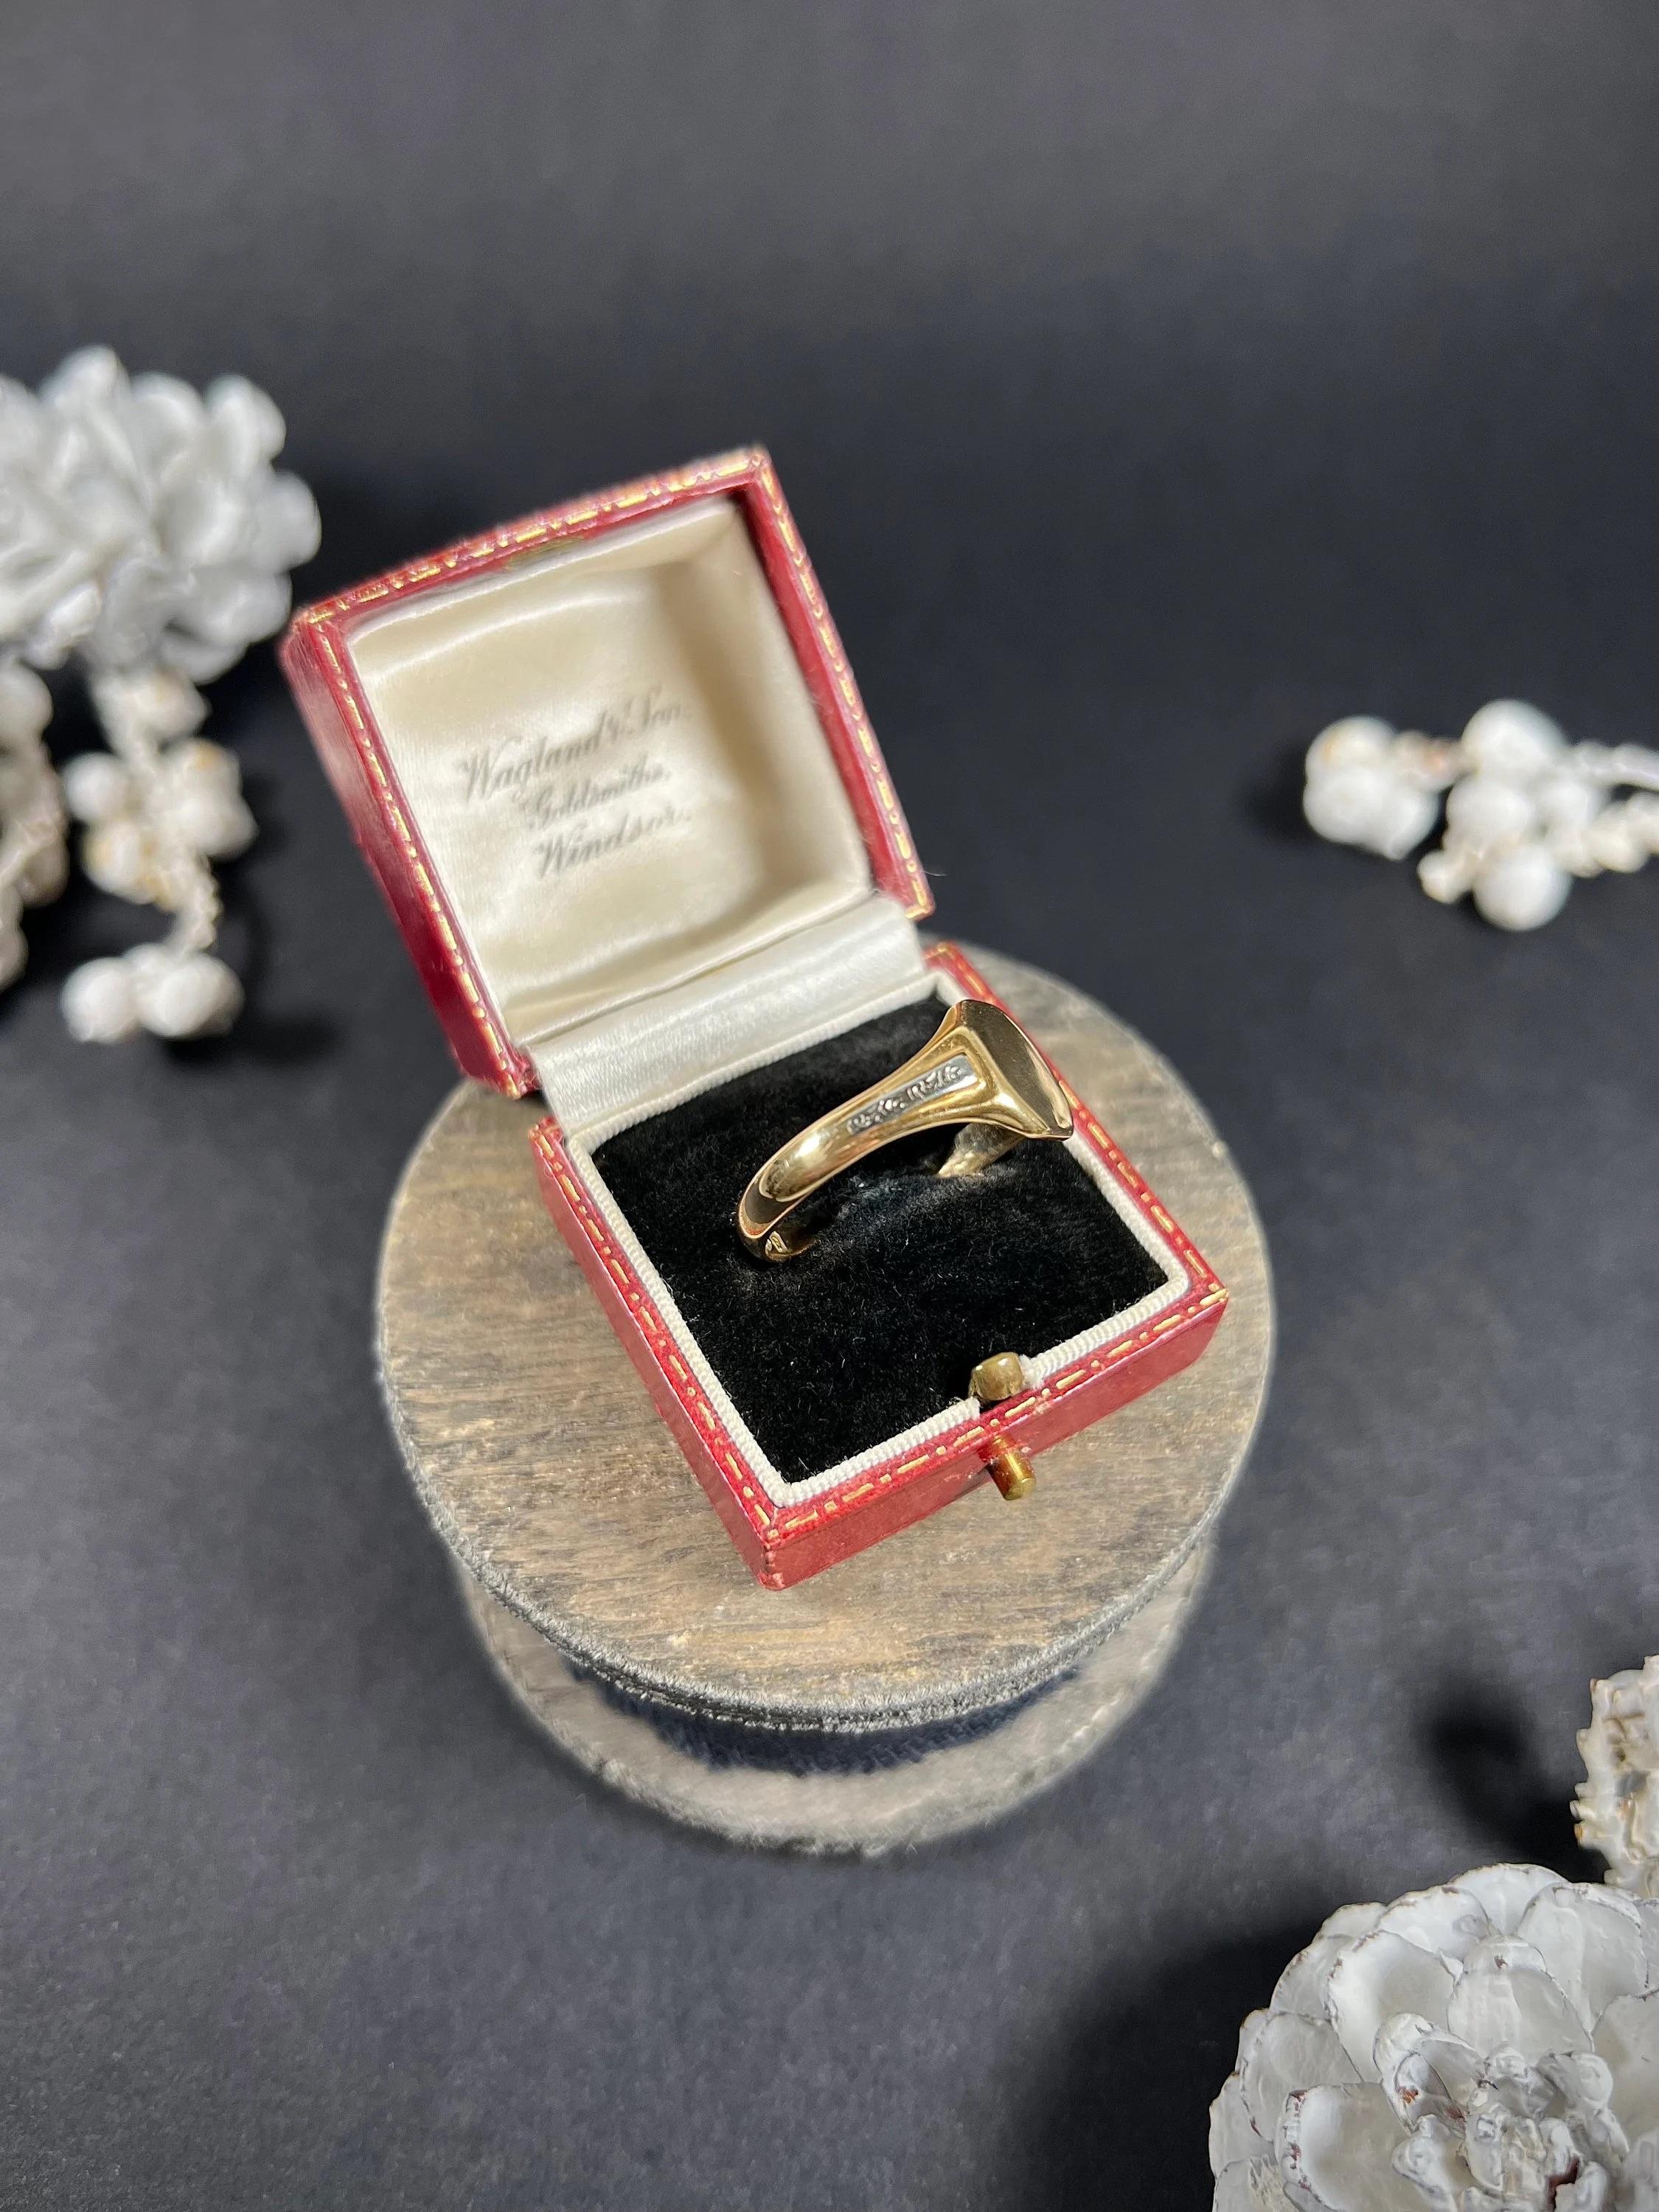 Vintage Signet Ring 

18ct Gold Stamped

Hallmarked Chester 1929

Makers Mark H C & S

This 18ct gold signet ring is truly a masterpiece. Its octagonal plain gold design gives it a classic look while the lovely white gold shoulders add a touch of